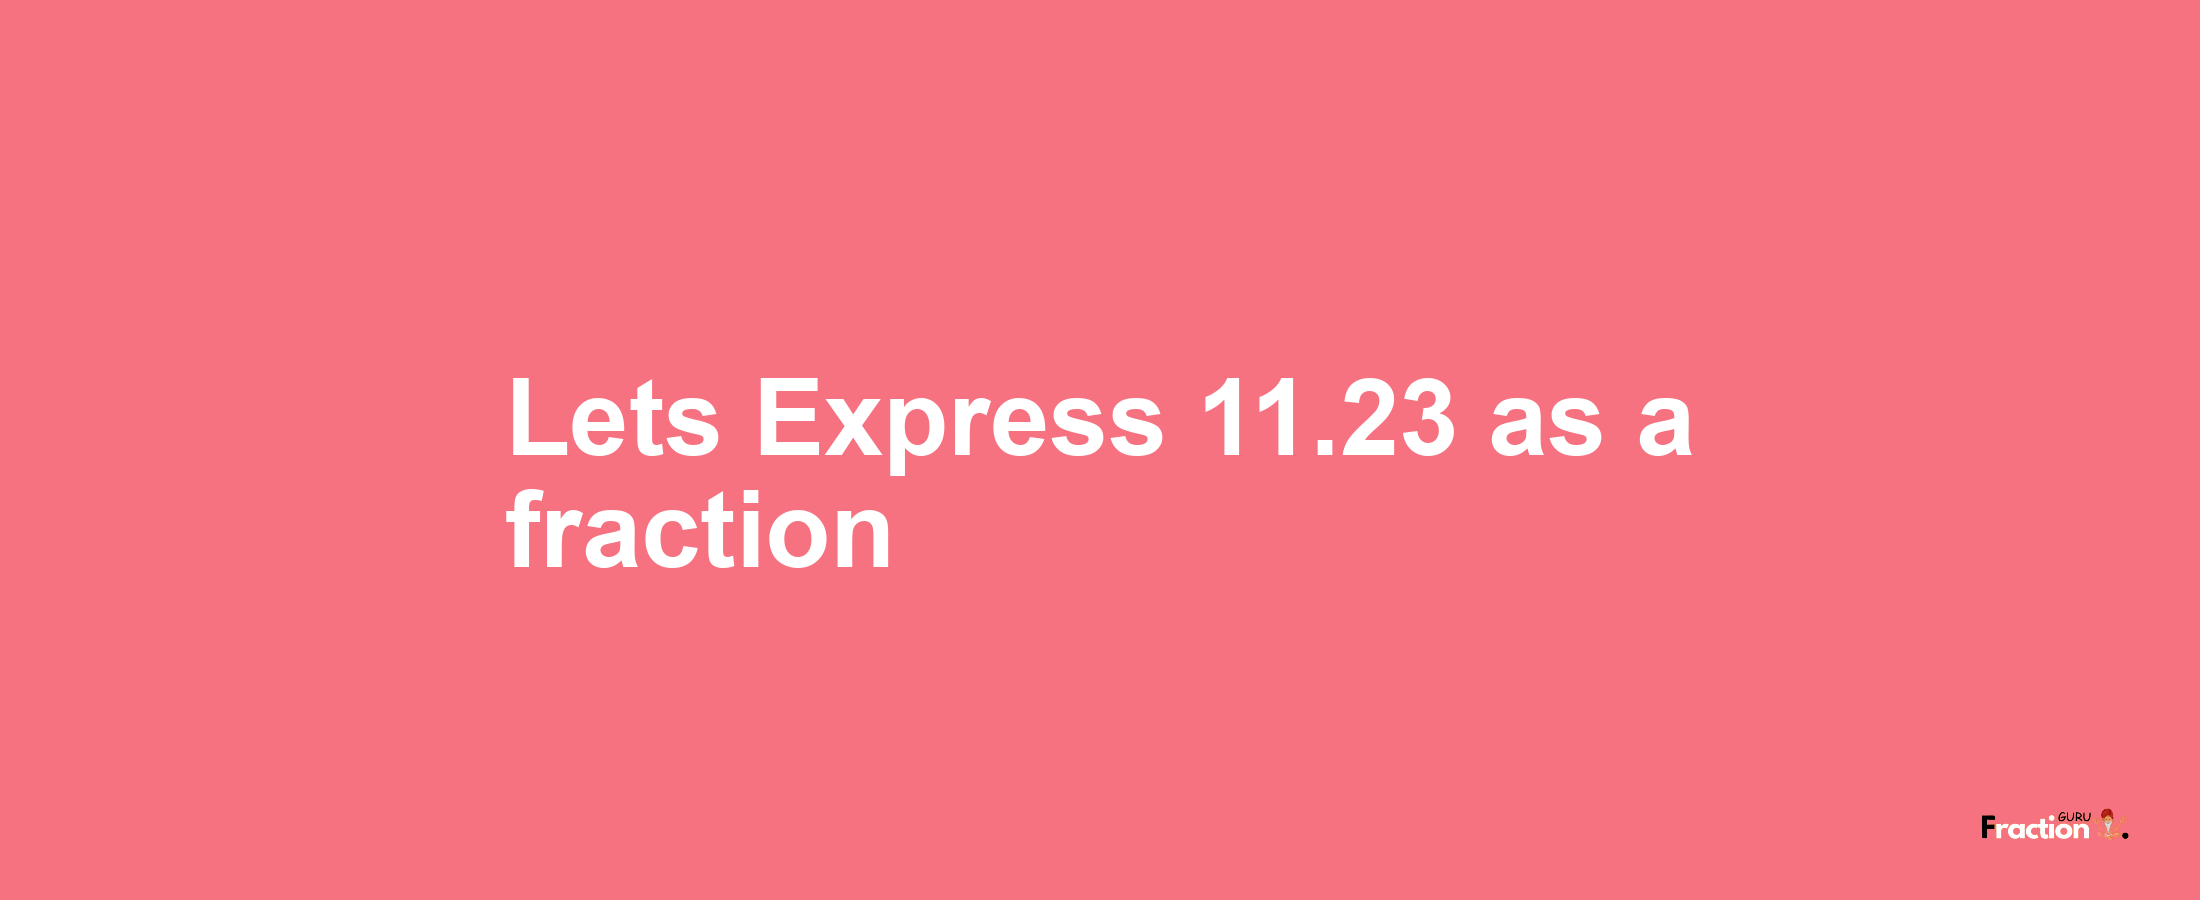 Lets Express 11.23 as afraction